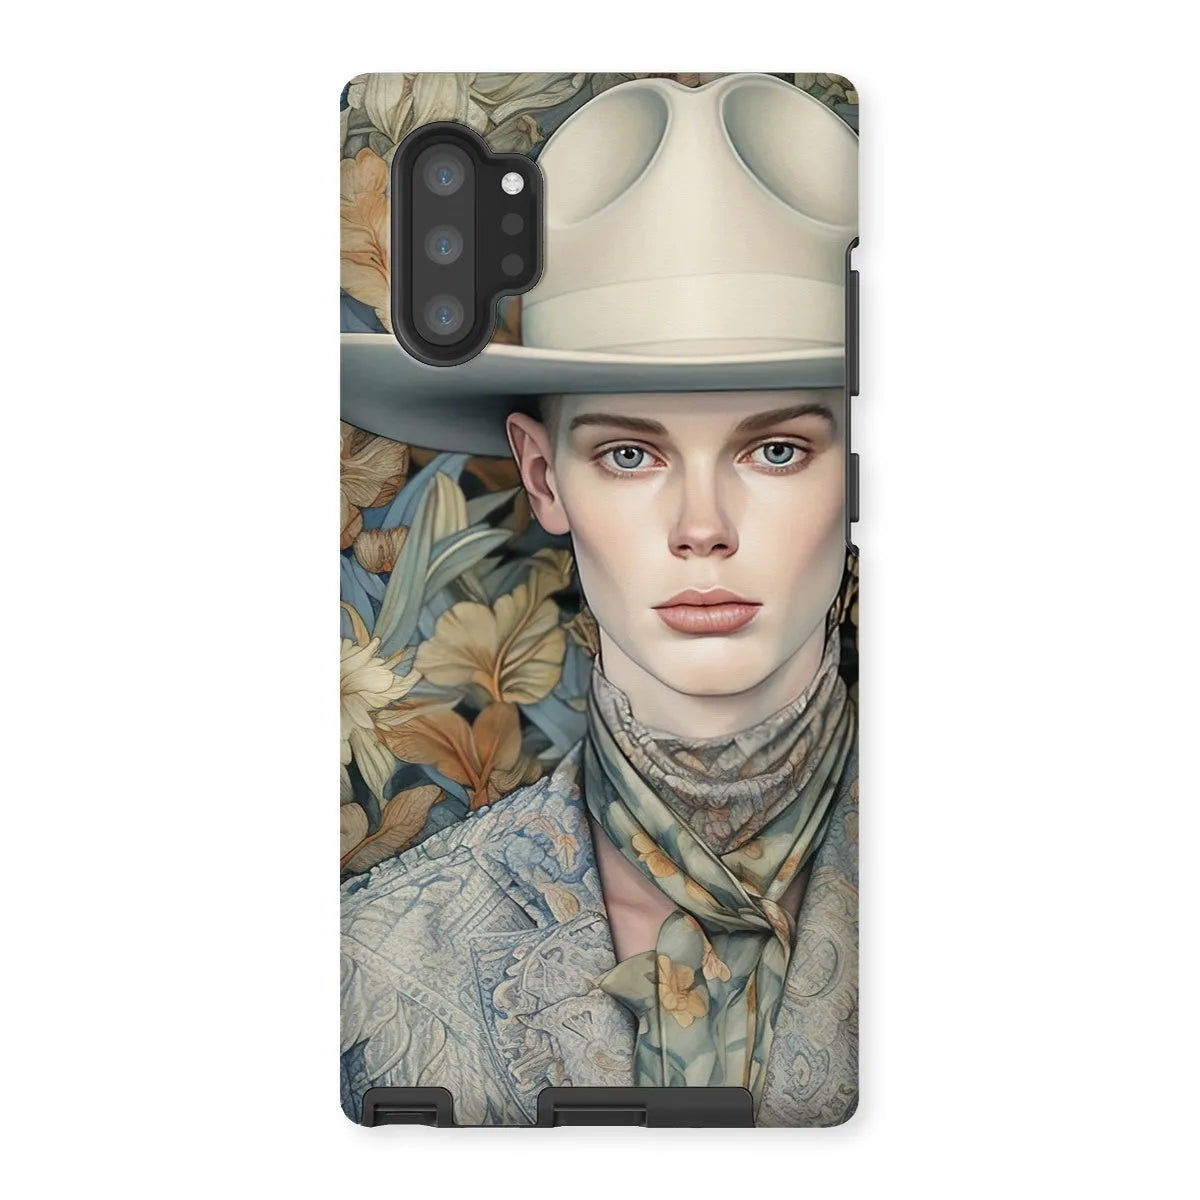 Jasper The Gay Cowboy - Dandy Gay Aesthetic Art Phone Case - Samsung Galaxy Note 10p / Matte - Mobile Phone Cases